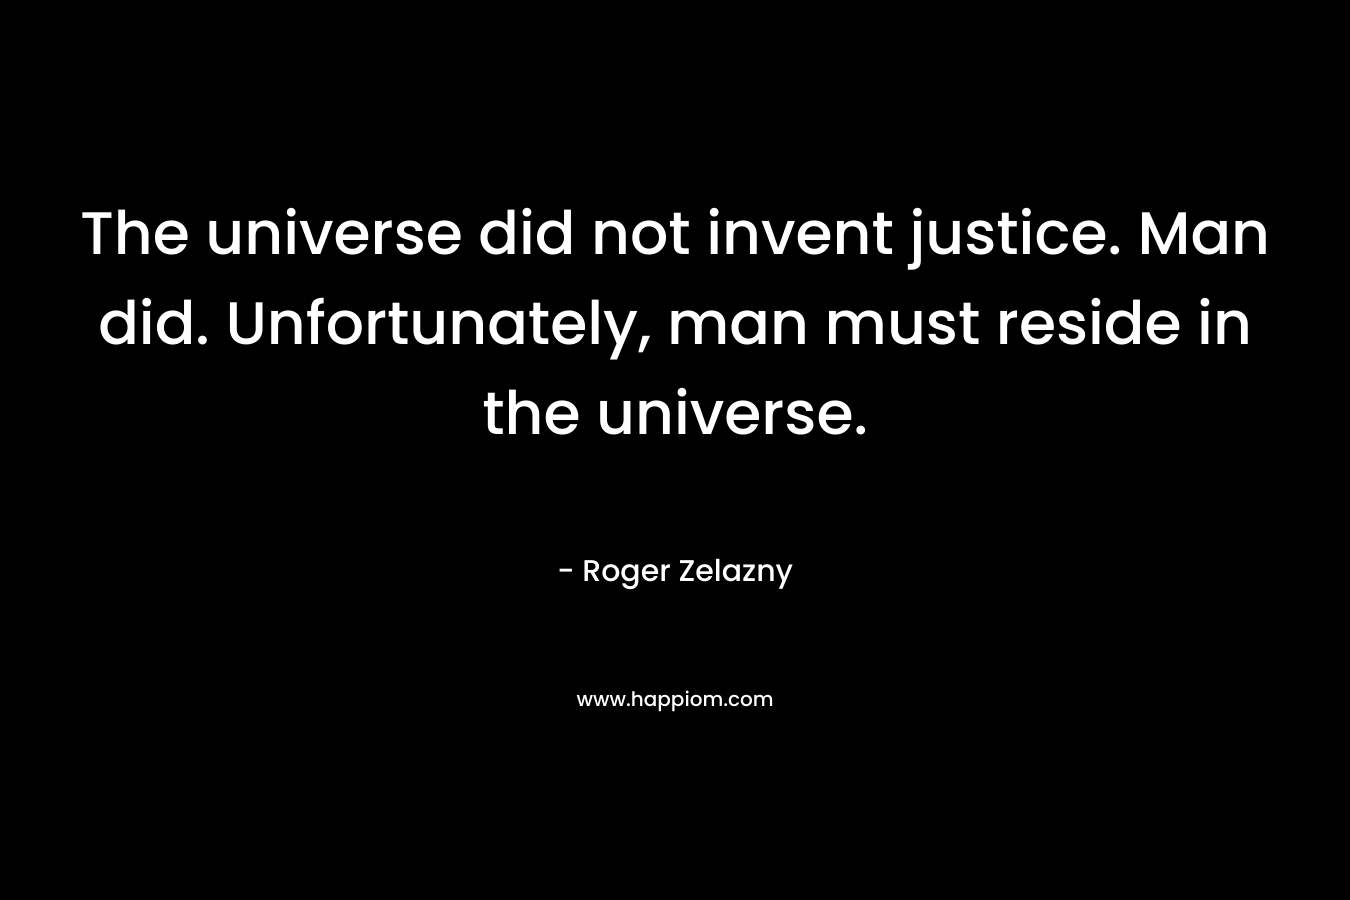 The universe did not invent justice. Man did. Unfortunately, man must reside in the universe. – Roger Zelazny